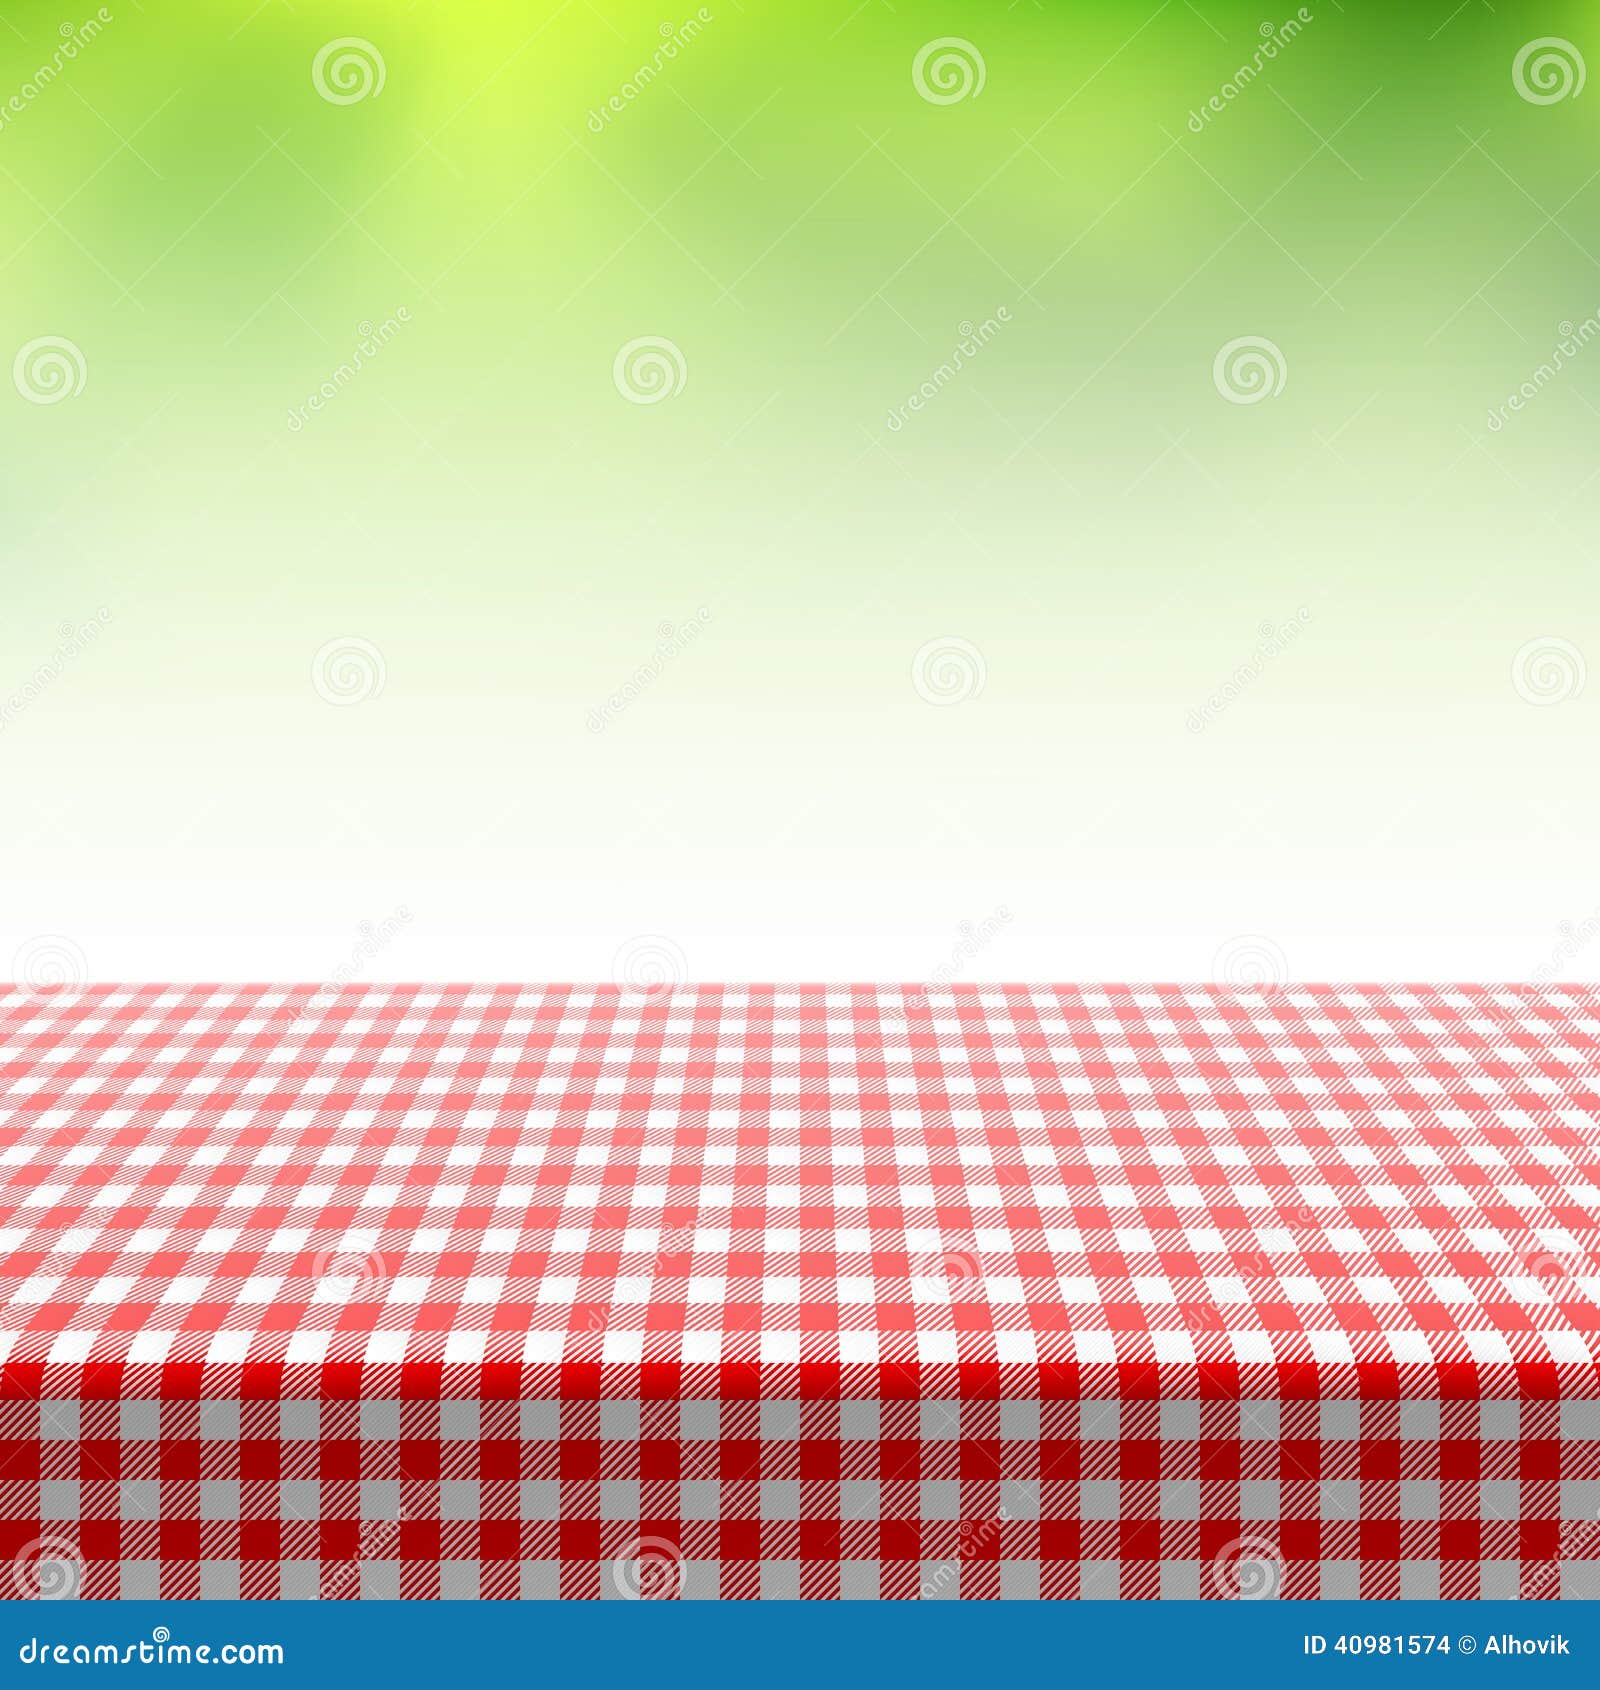 Picnic Table with Tablecloth